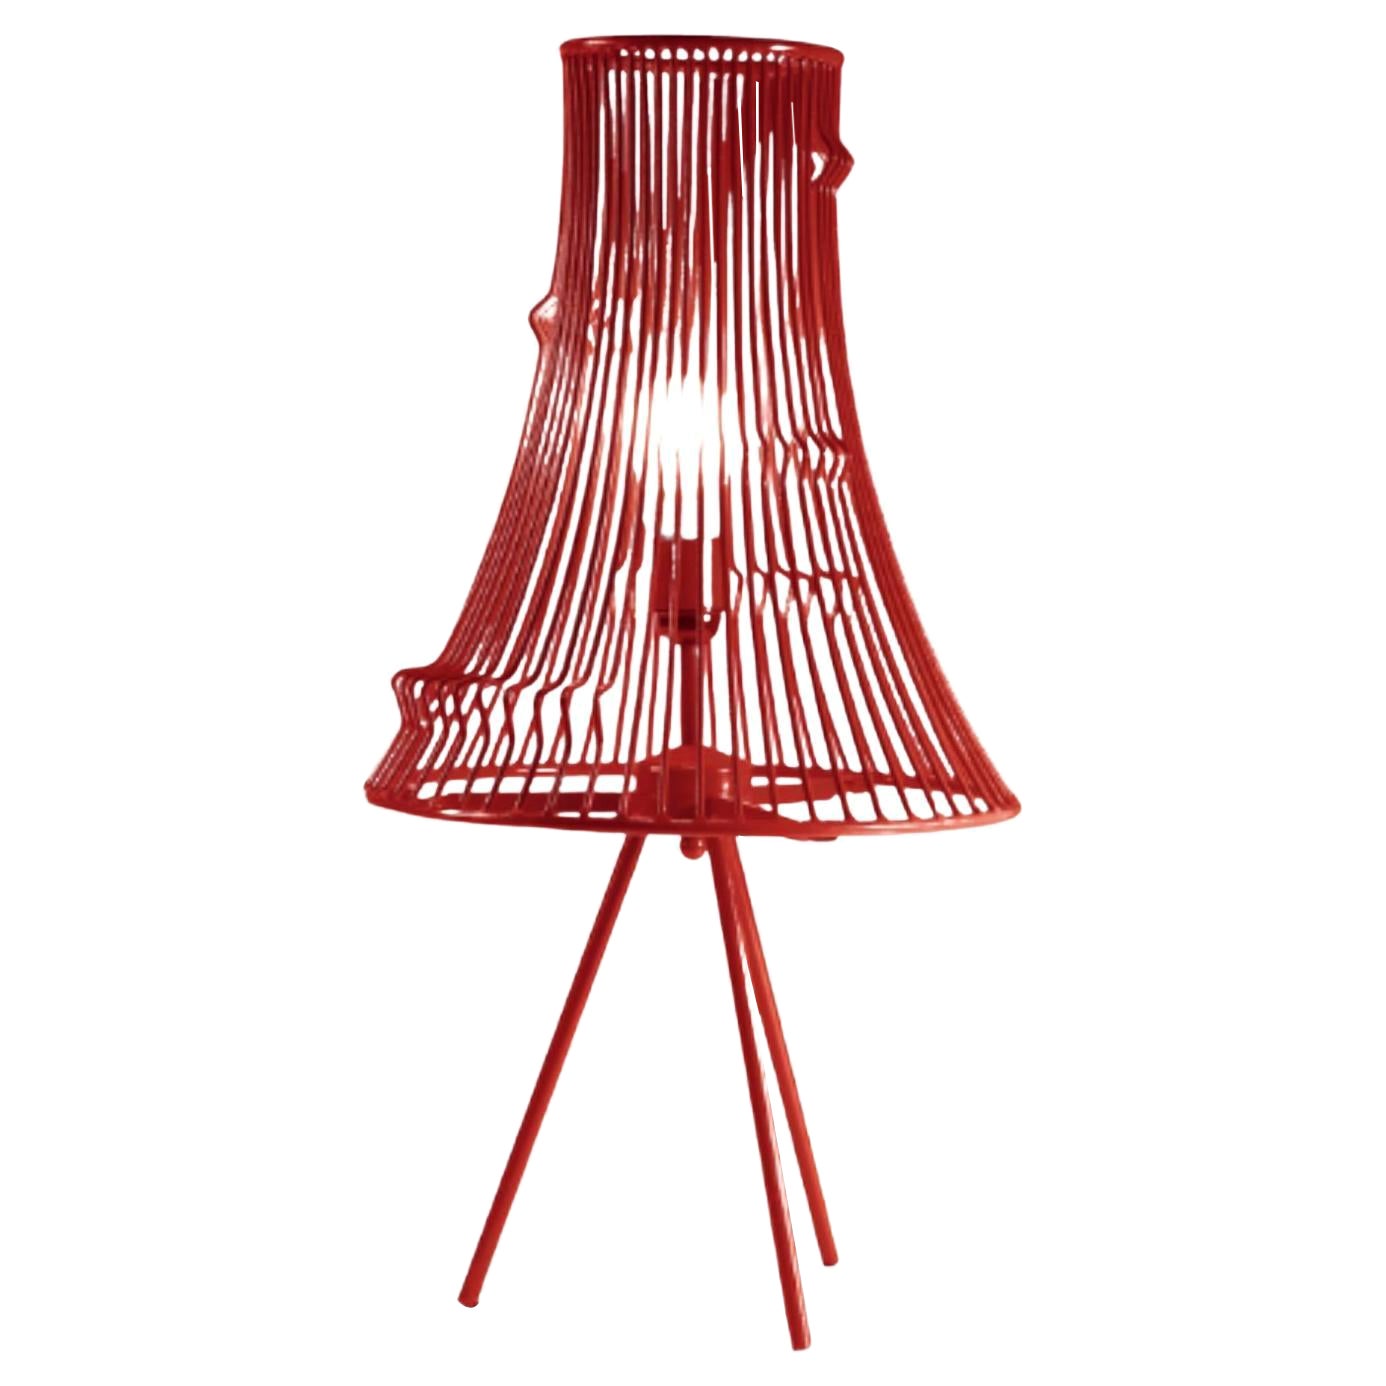 Lipstick Extrude Table Lamp by Dooq For Sale